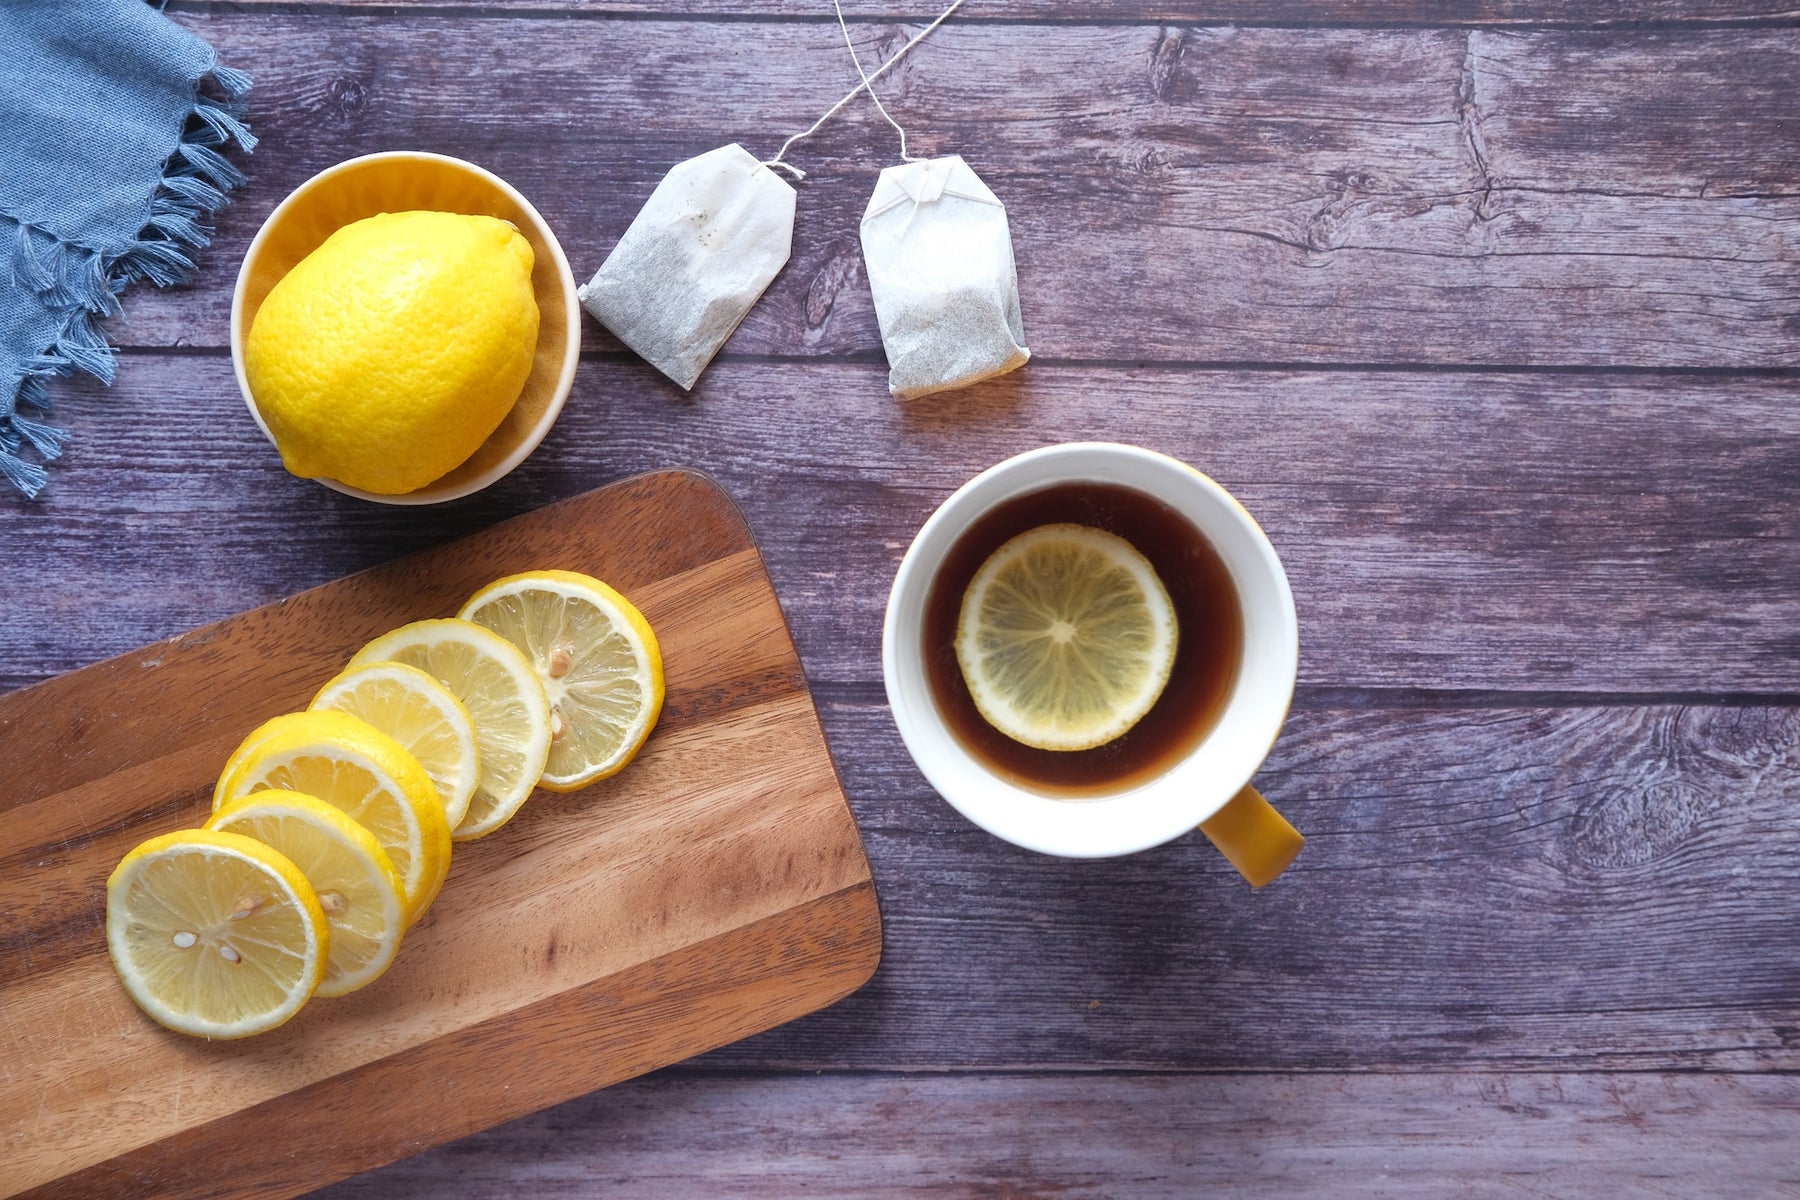 Should You Add Lemon Essential Oil to Your Tea? Think Twice!